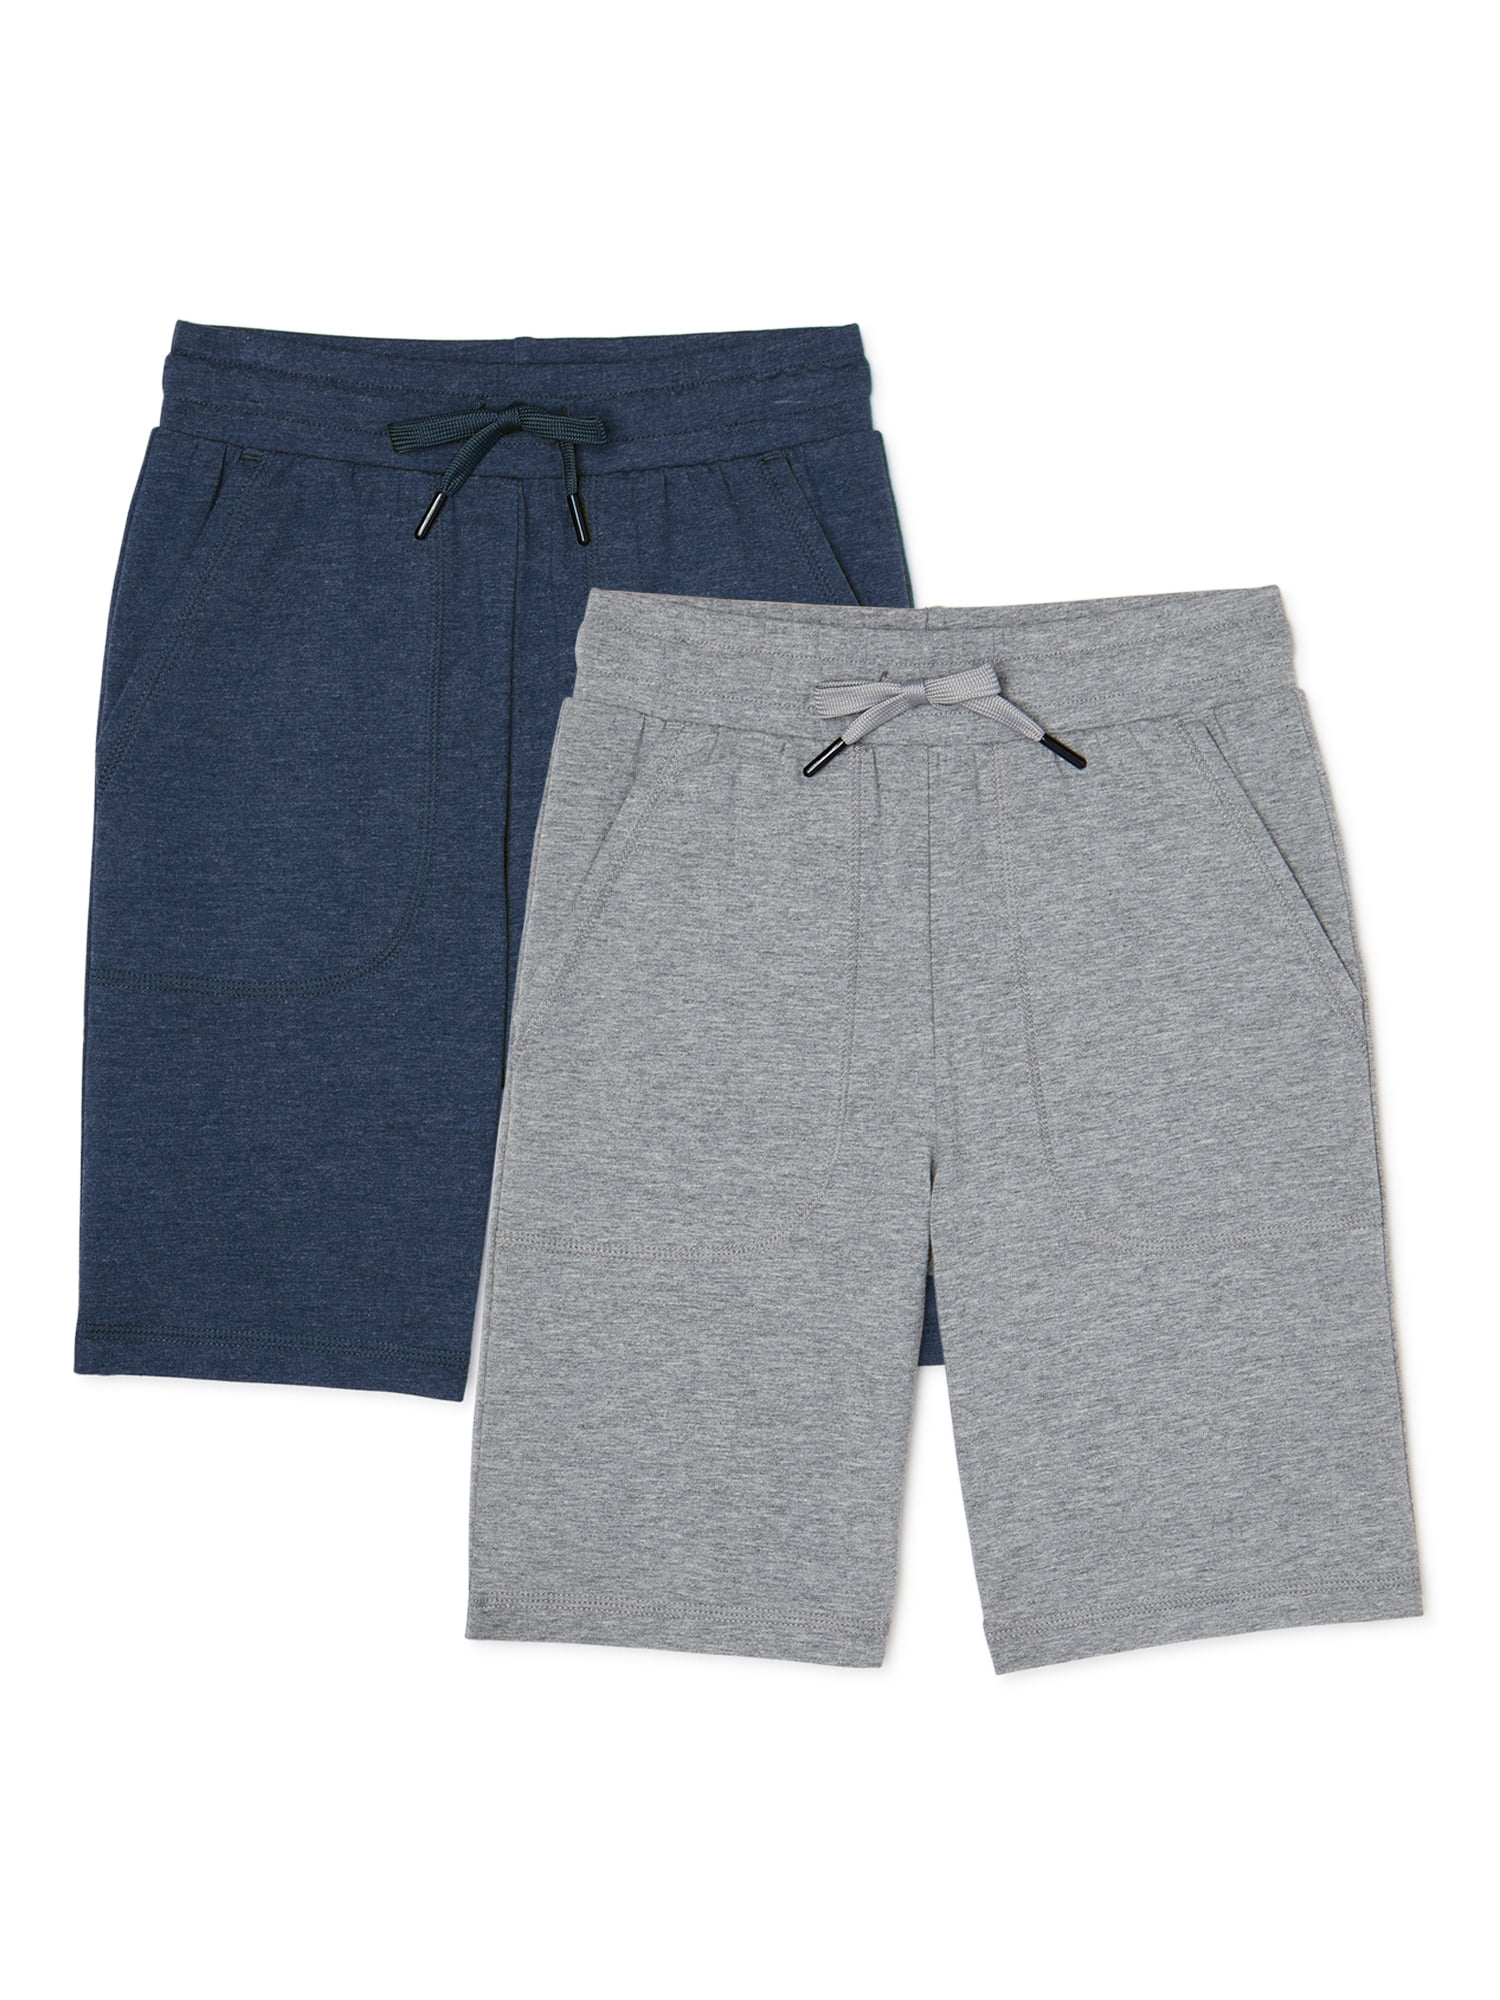 Athletic Works Boys Jersey Knit Sweat Shorts, 2-Pack, Sizes 4-18 